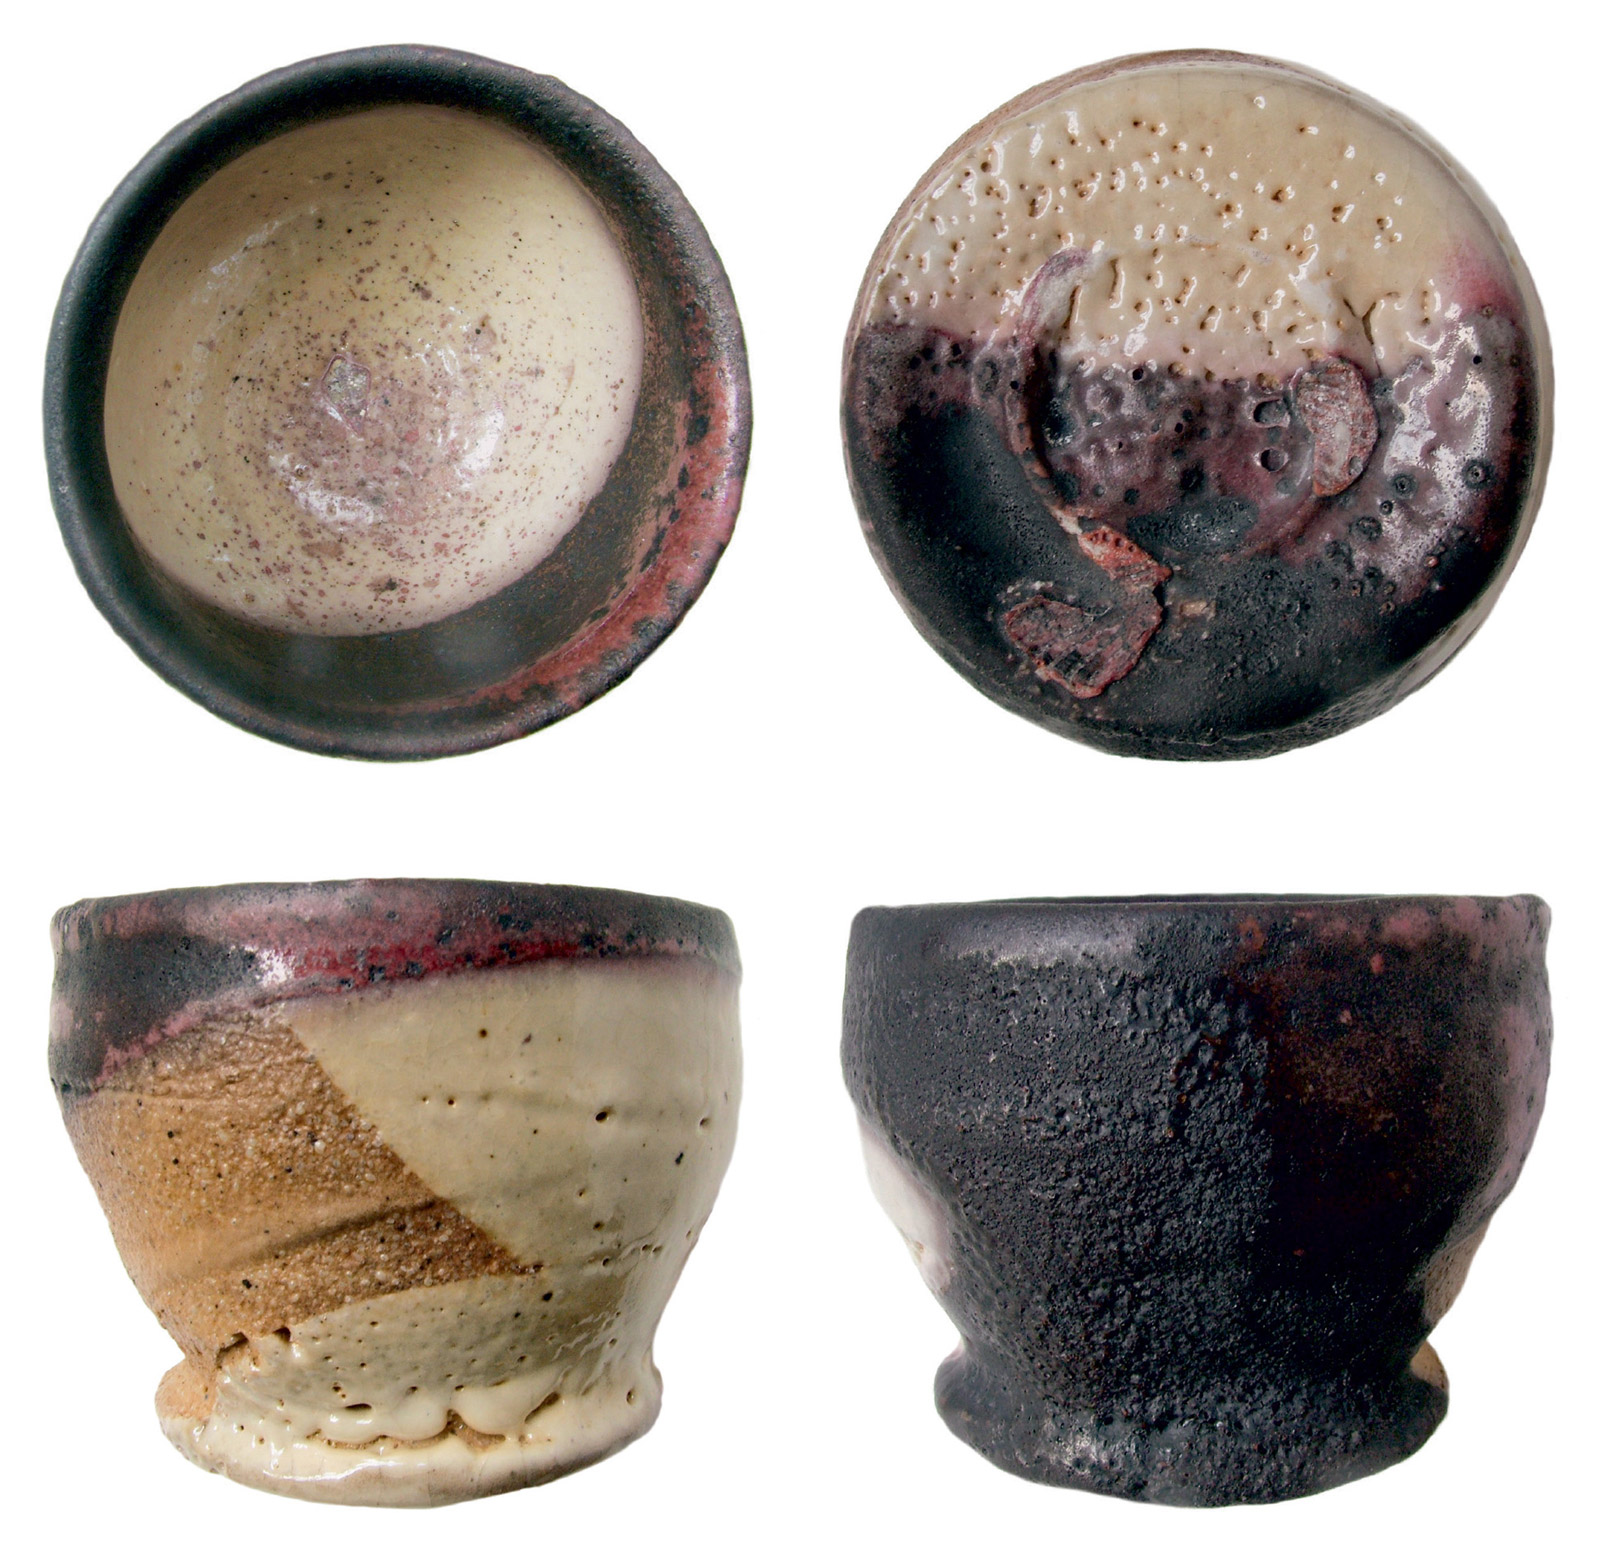 Four photographs depicting the top, bottom, and sides of a guinomi made by Jeff Shapiro.